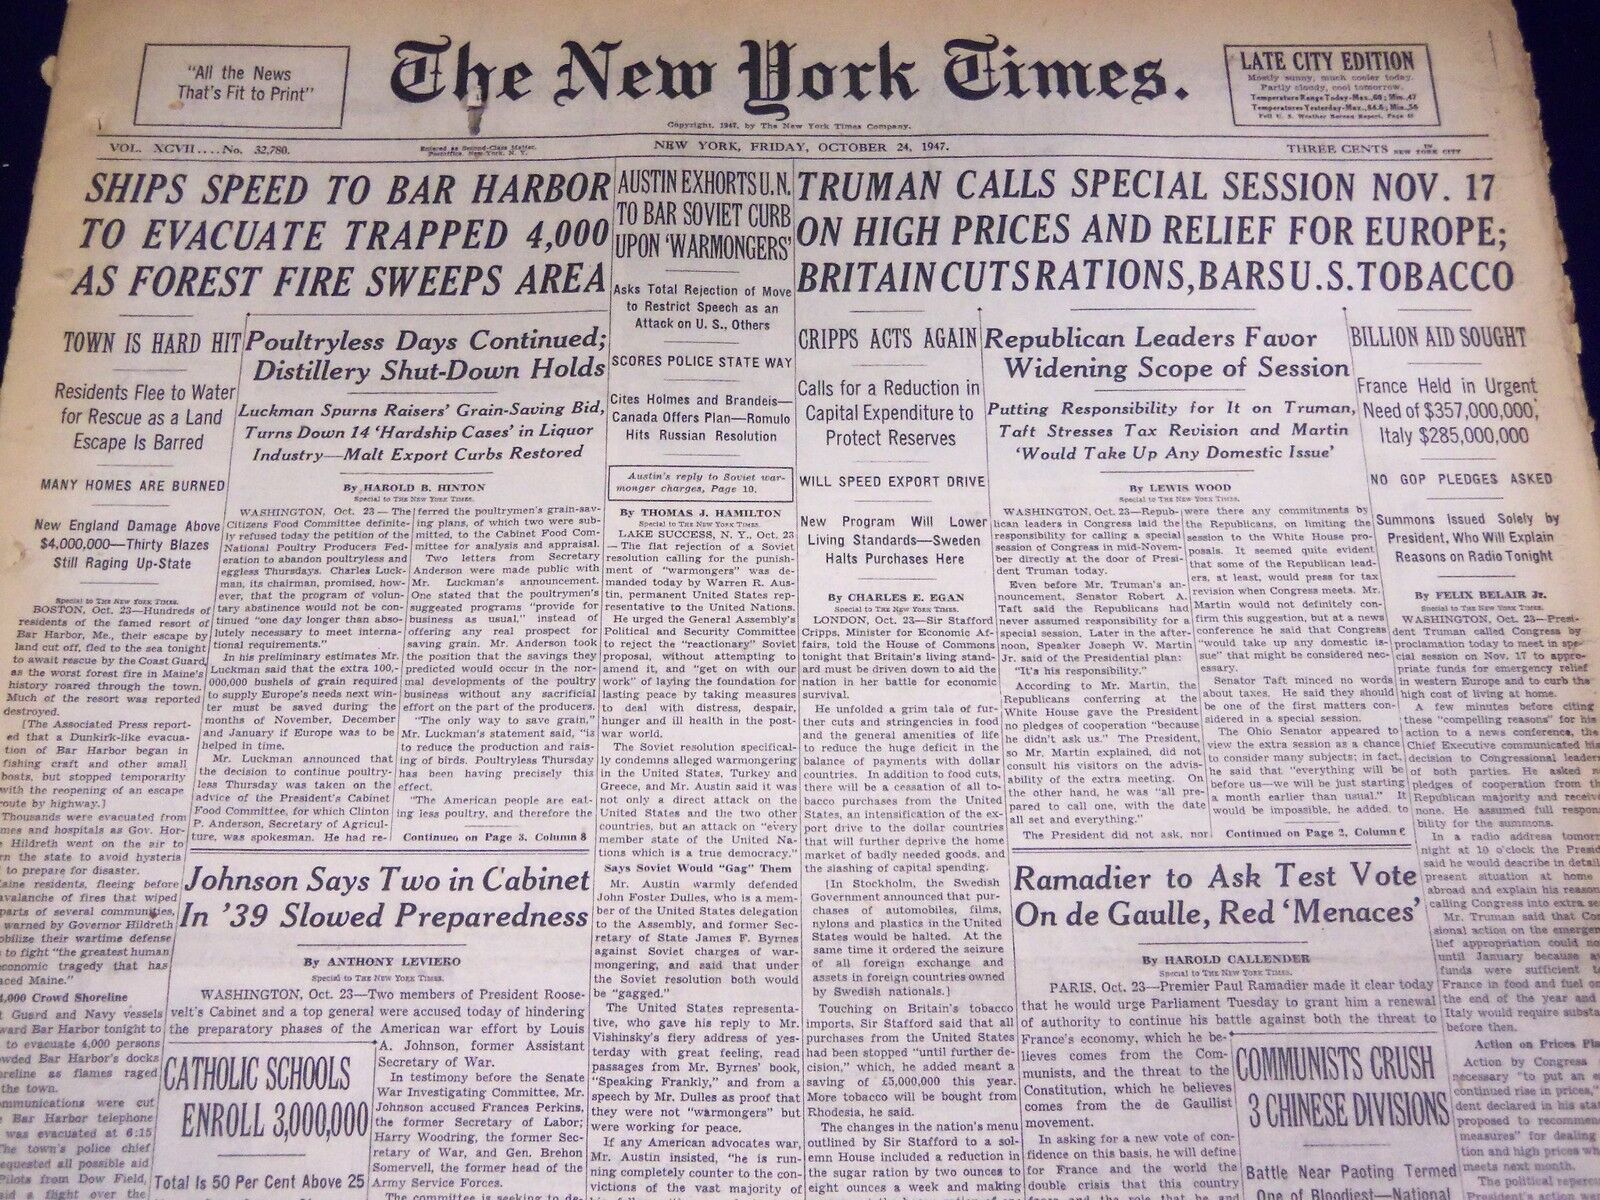 1947 OCTOBER 24 NEW YORK TIMES - BAR HARBOR FOREST FIRES - NT 3267